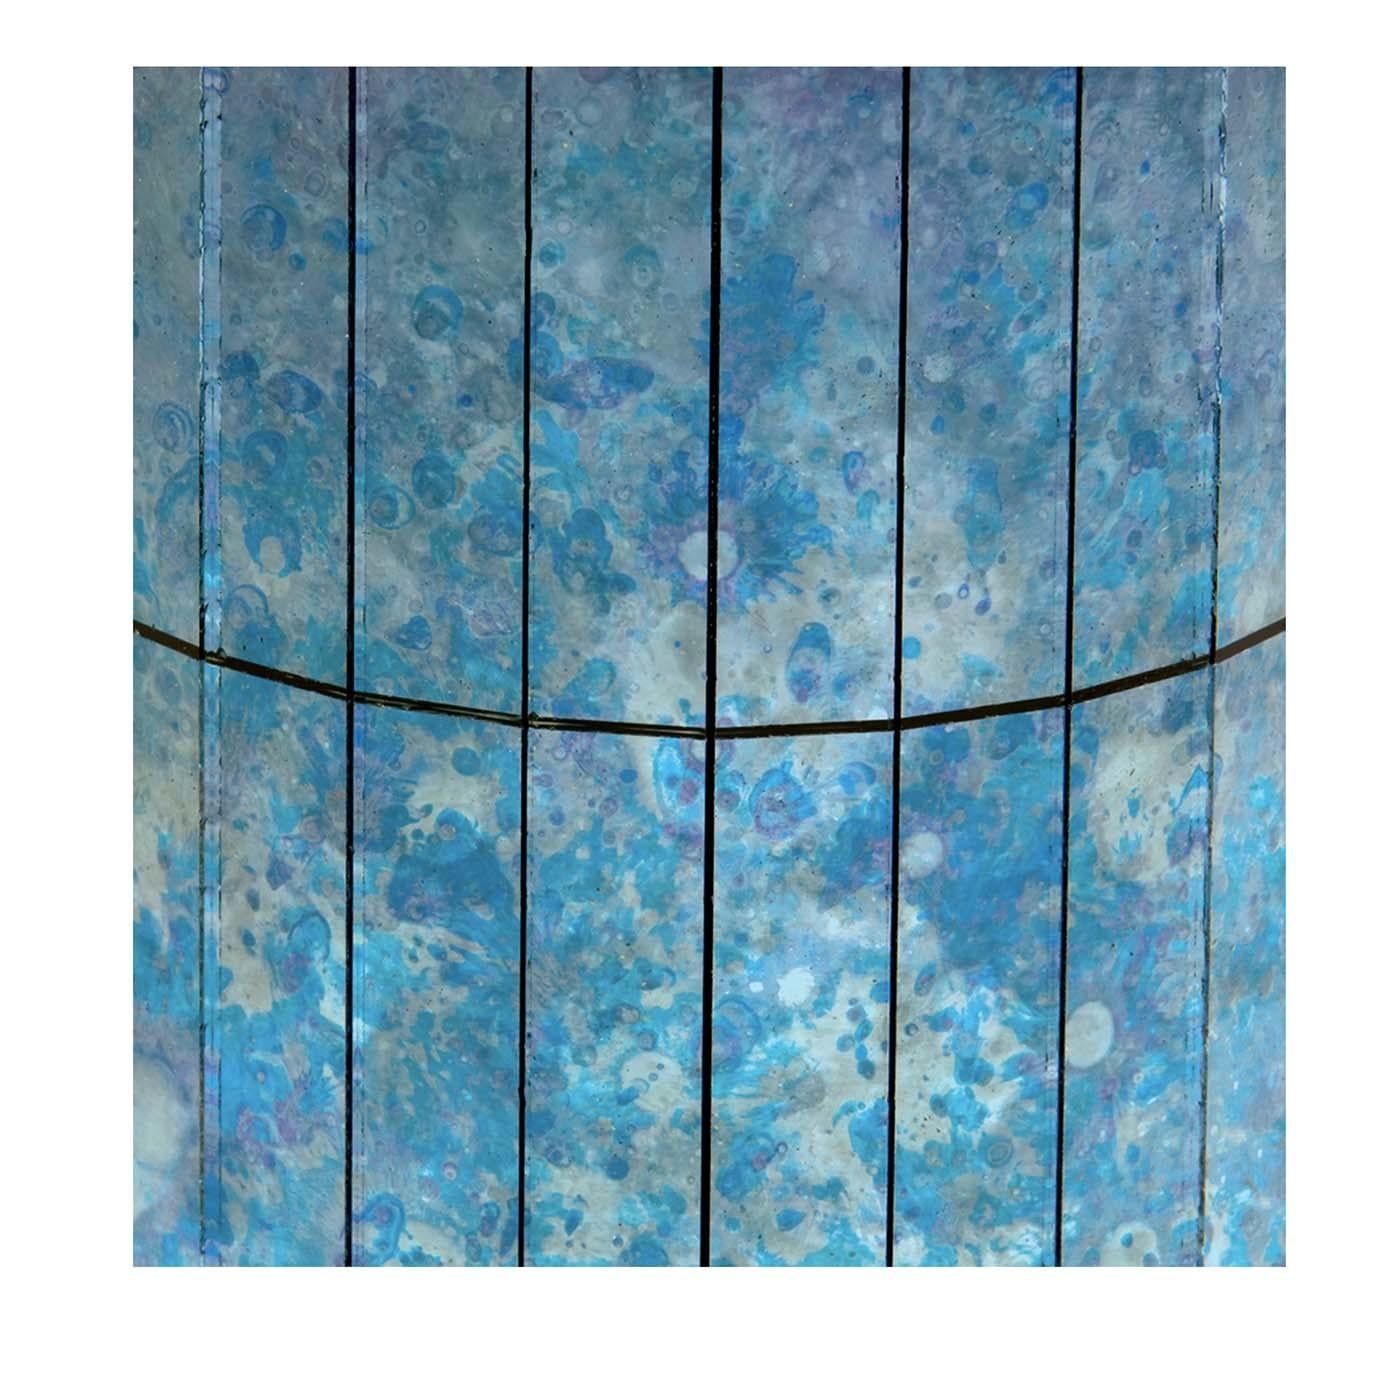 The heavenly cobalt blue color of these canvased decorative panels made of mosaic glass tiles is another masterpiece made by the artisans at Antique Mirror. The varying shades of blue, purple, and white on the glass make for a shining display on any